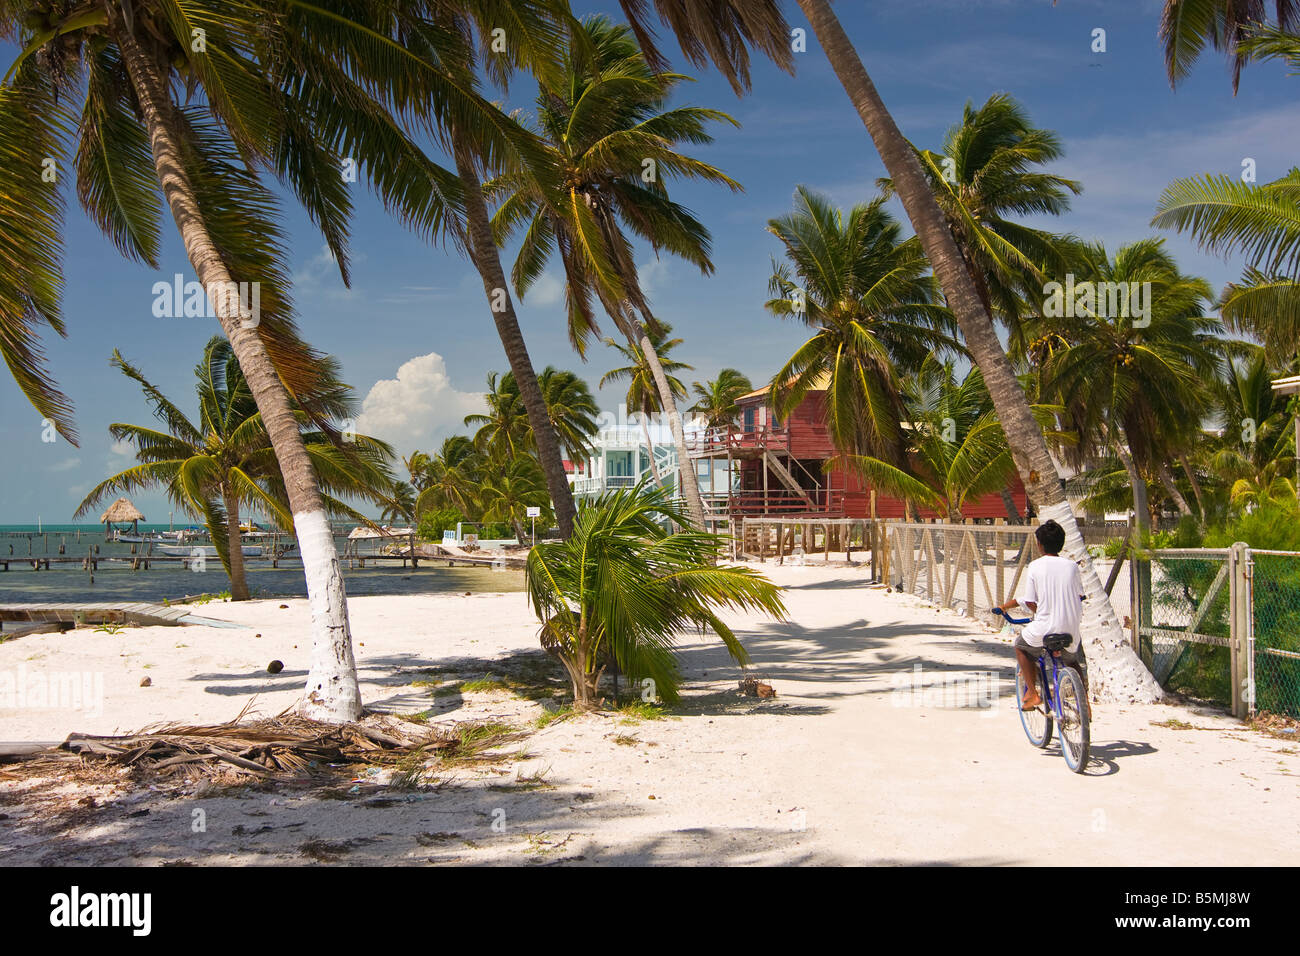 CAYE CAULKER BELIZE Palm trees on sandy beach and person on bicycle Stock Photo